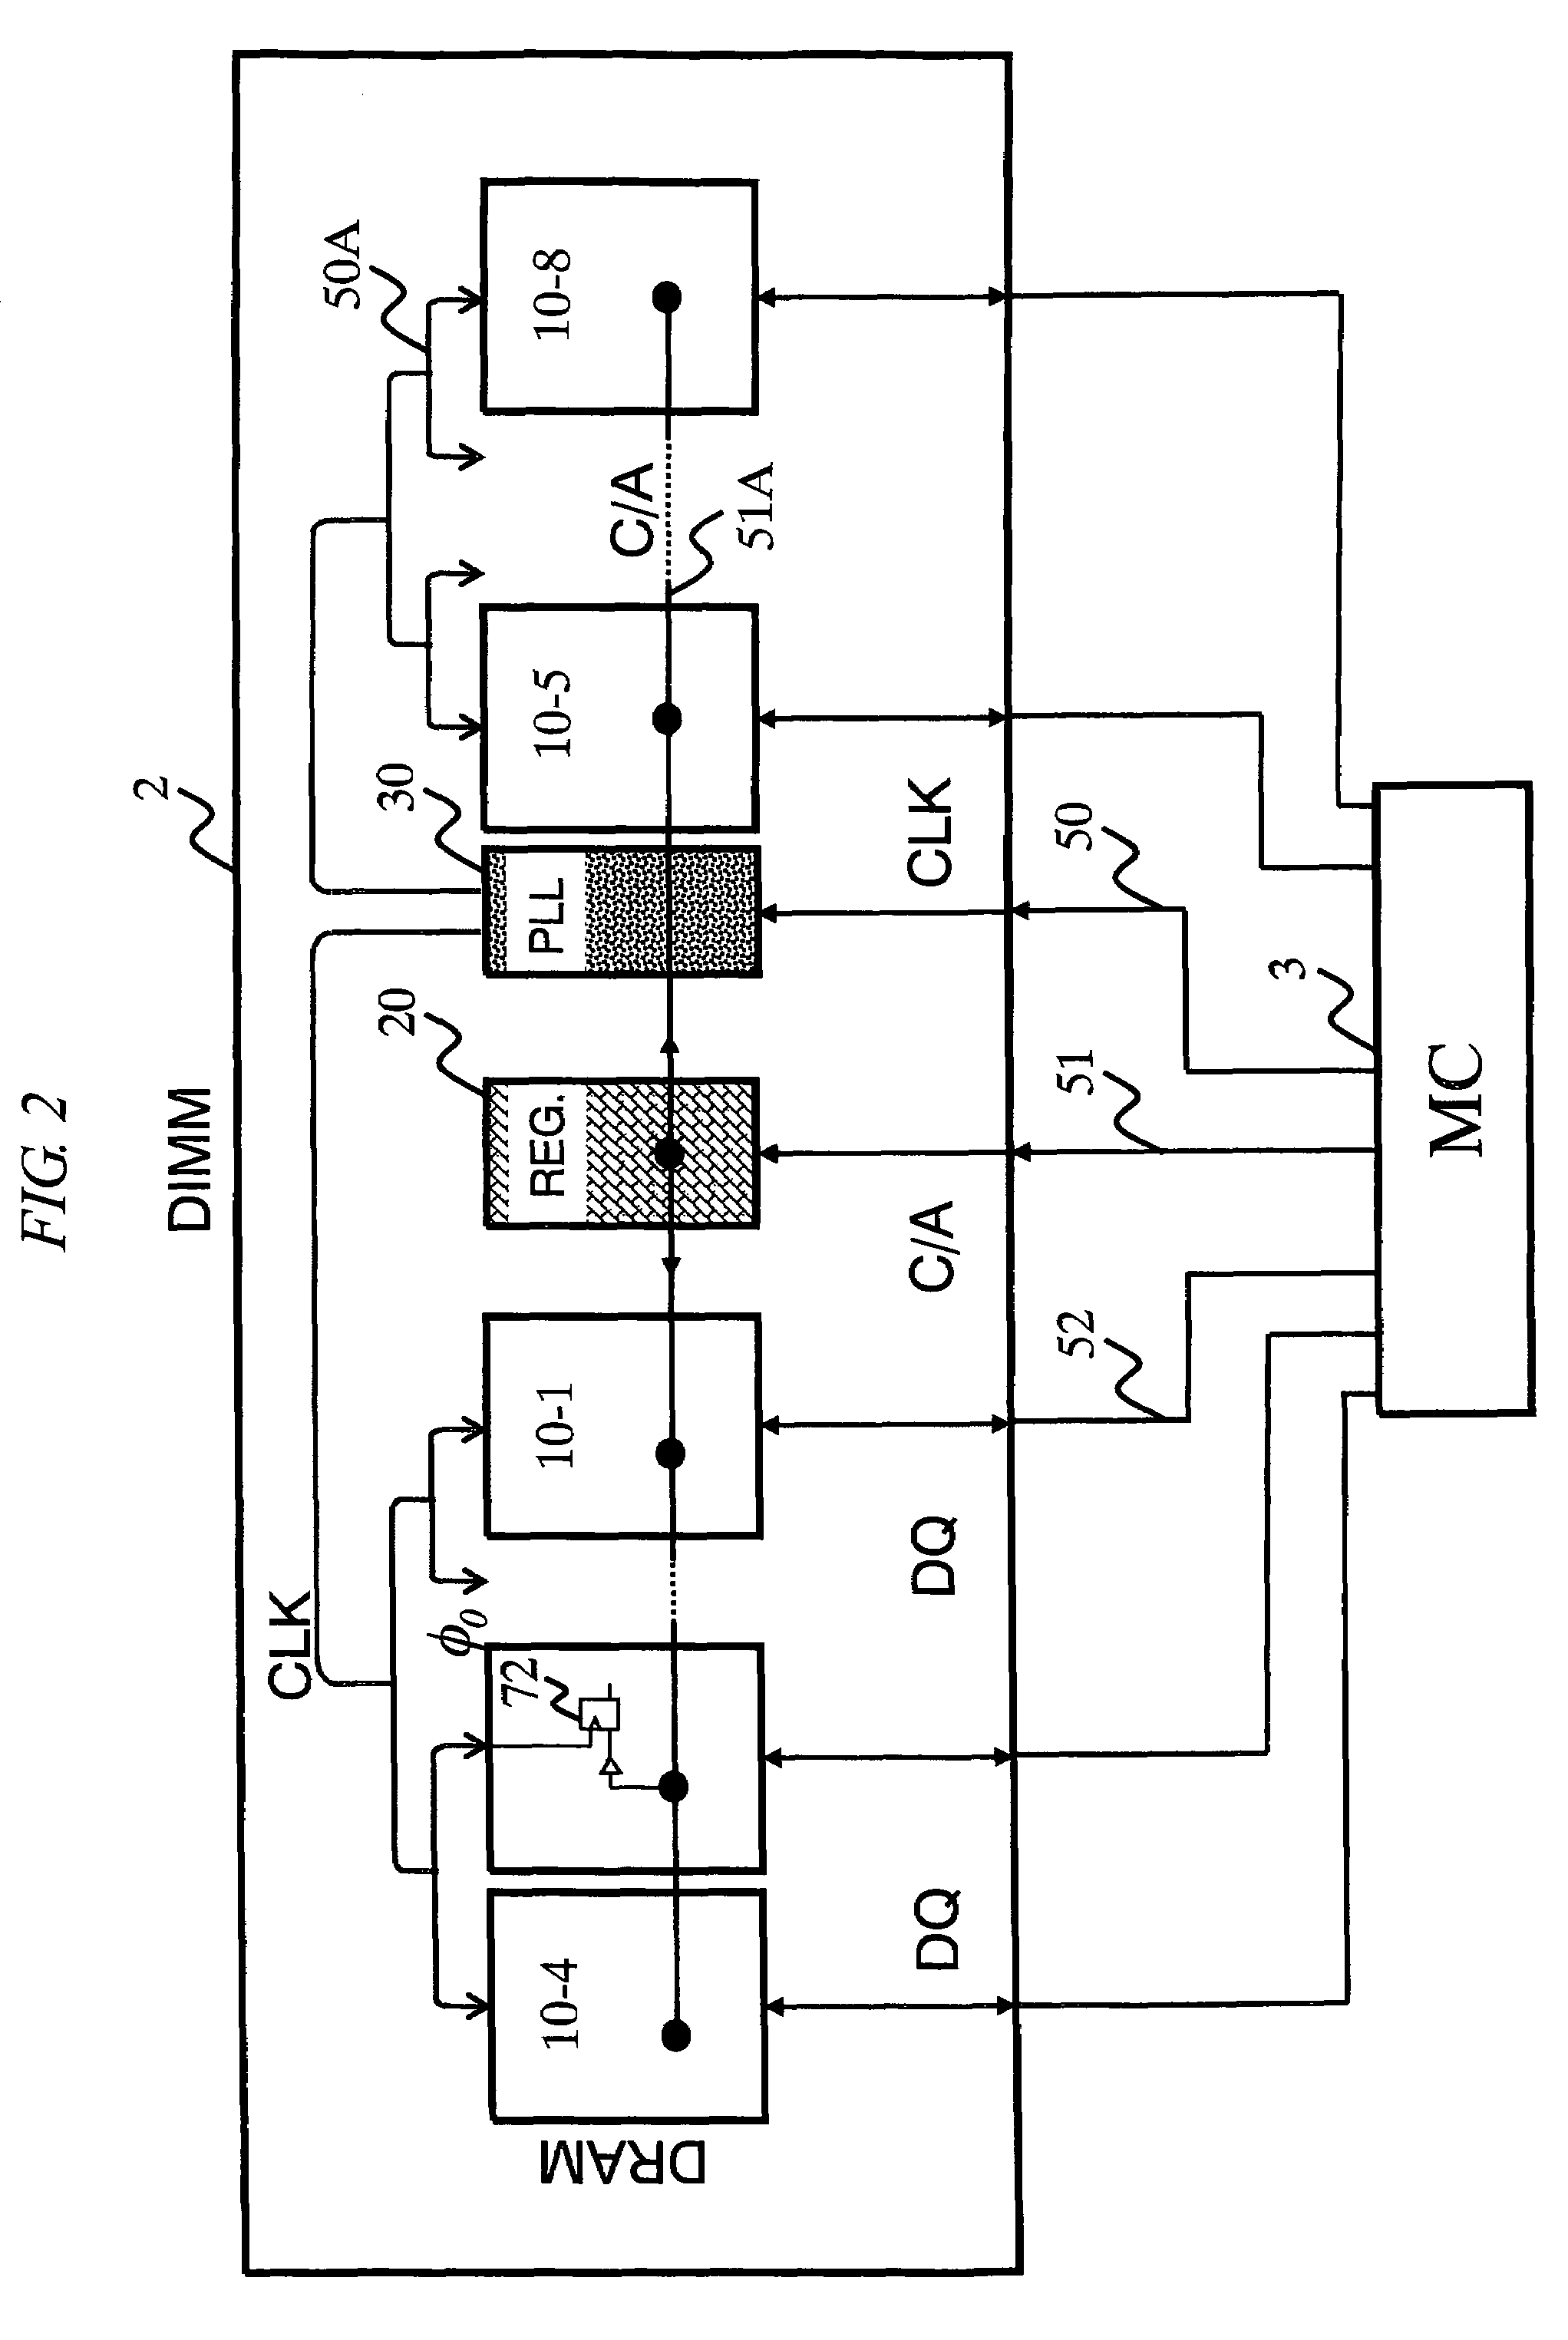 Semiconductor memory module, memory system, circuit, semiconductor device, and DIMM